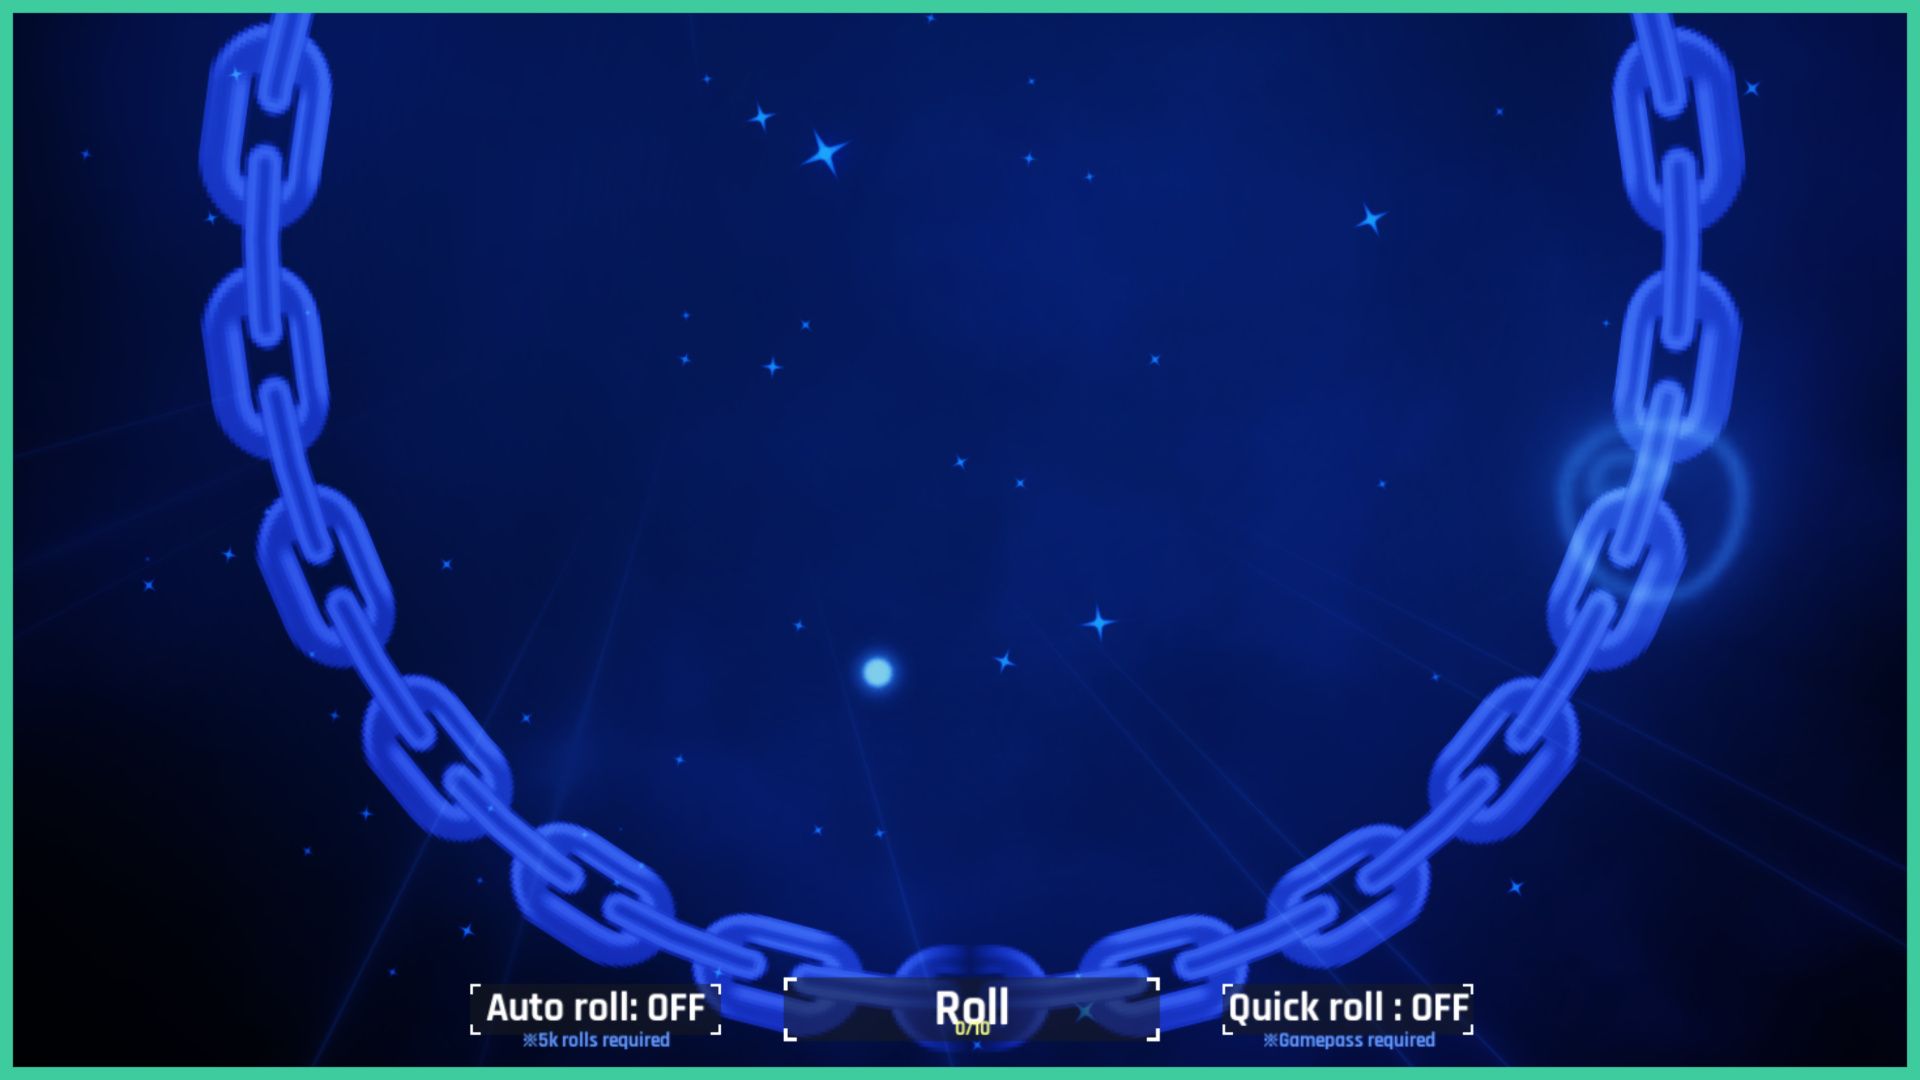 feature image for our sol's rng buffs guide, the image features a screenshot of the sky during the starfall biome as a blue chain circles around the image, there are stars falling down from the sky